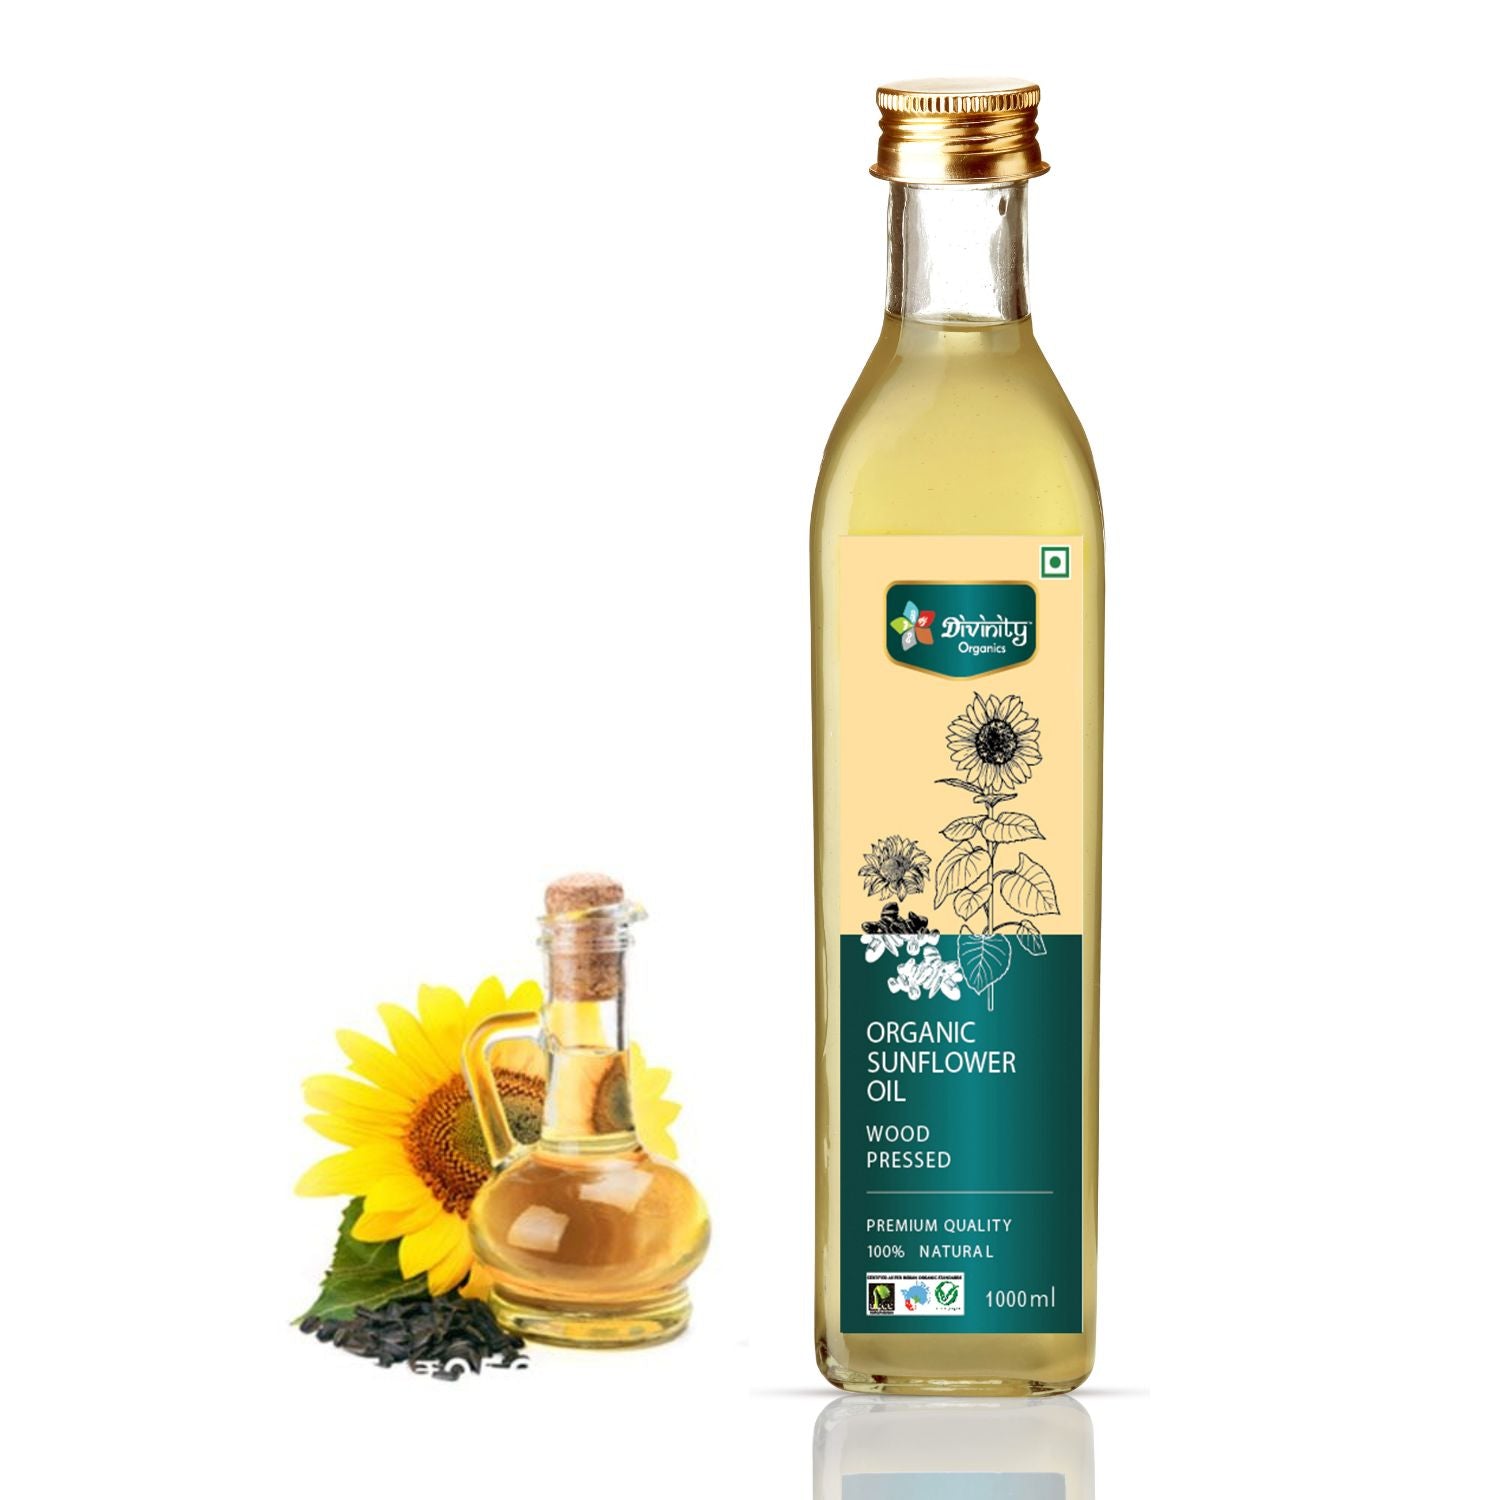 Divinity Organics - Organic Sunflower Oil Wood Pressed: Wood Pressed Sunflower oil is extracted by using hand picked oil seeds. The dried sunflower seeds are crushed in a Wood press (Marachekku) and oil is kept in sunlight for 2 days for the sediments to settle. This method helps to retain its natural aroma as well as nutritious components of the oil.